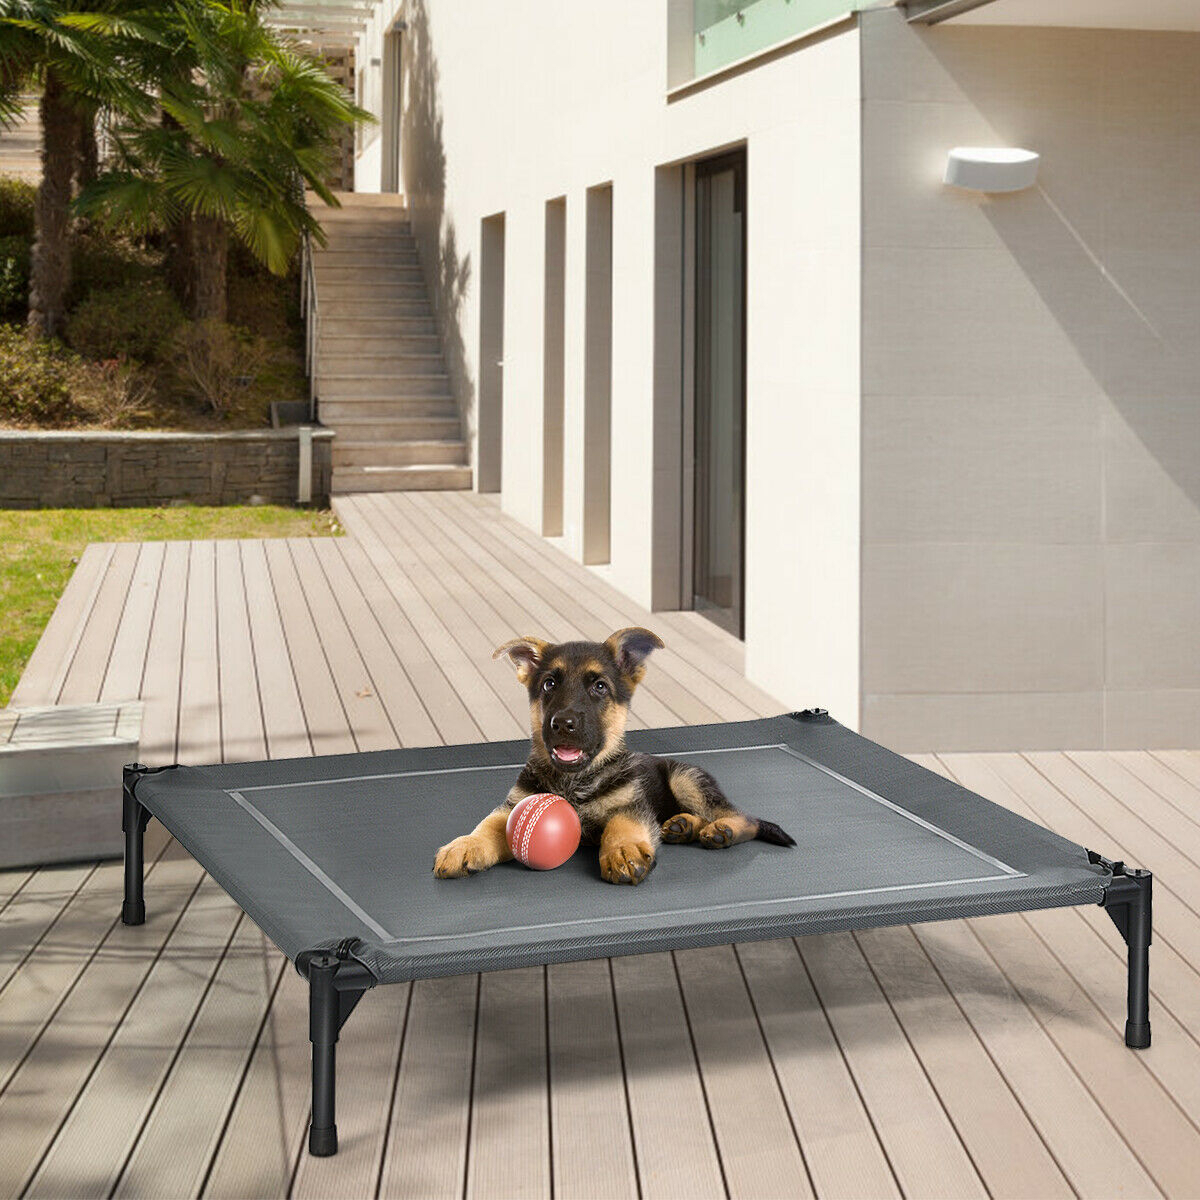 36'' Portable Elevated Dog Cot Outdoor Cooling Pet Bed W/ Removable Canopy Shade